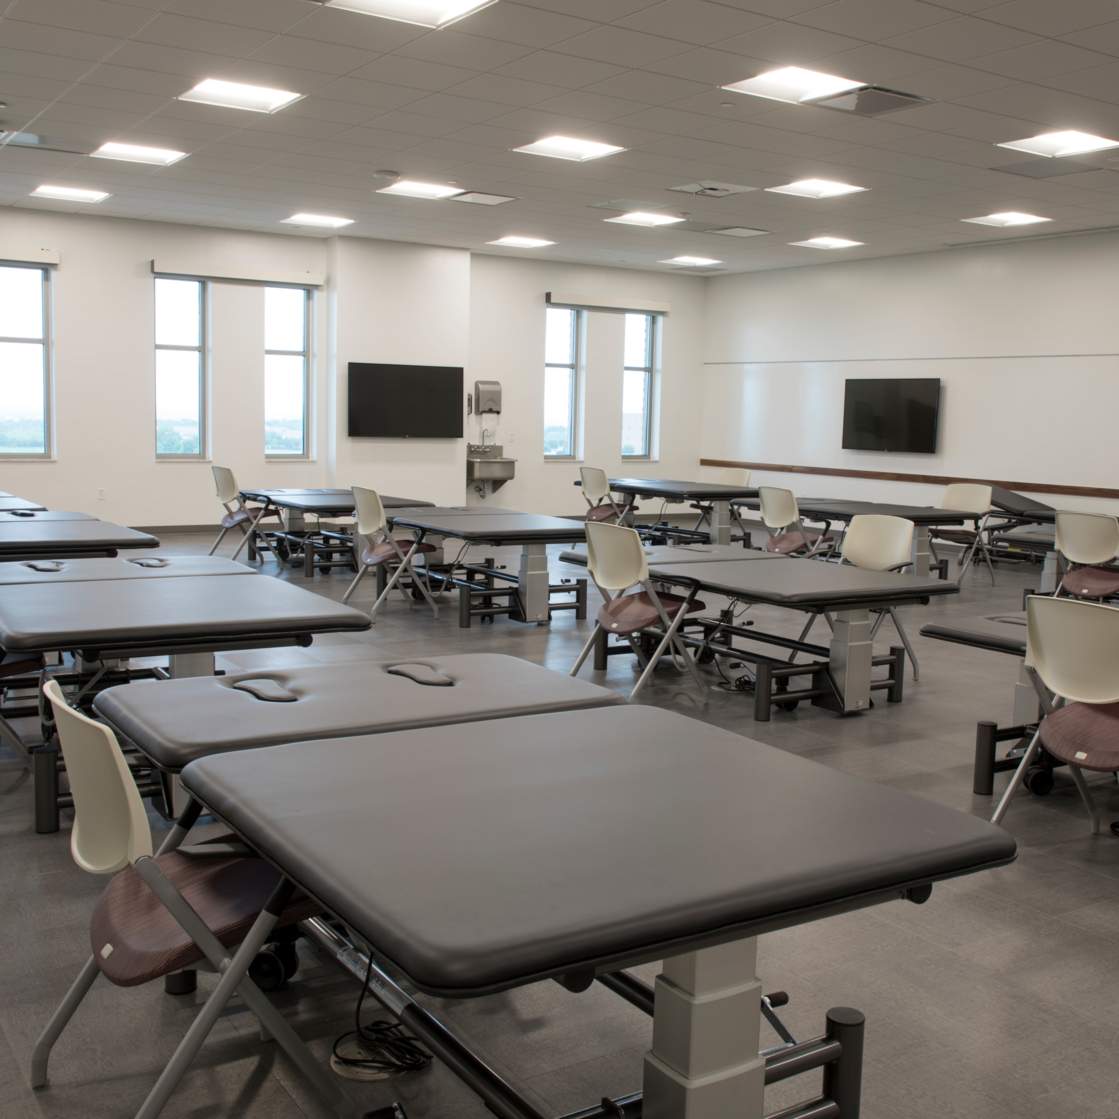 the inside of a classroom with desks made specifically for health professions studies